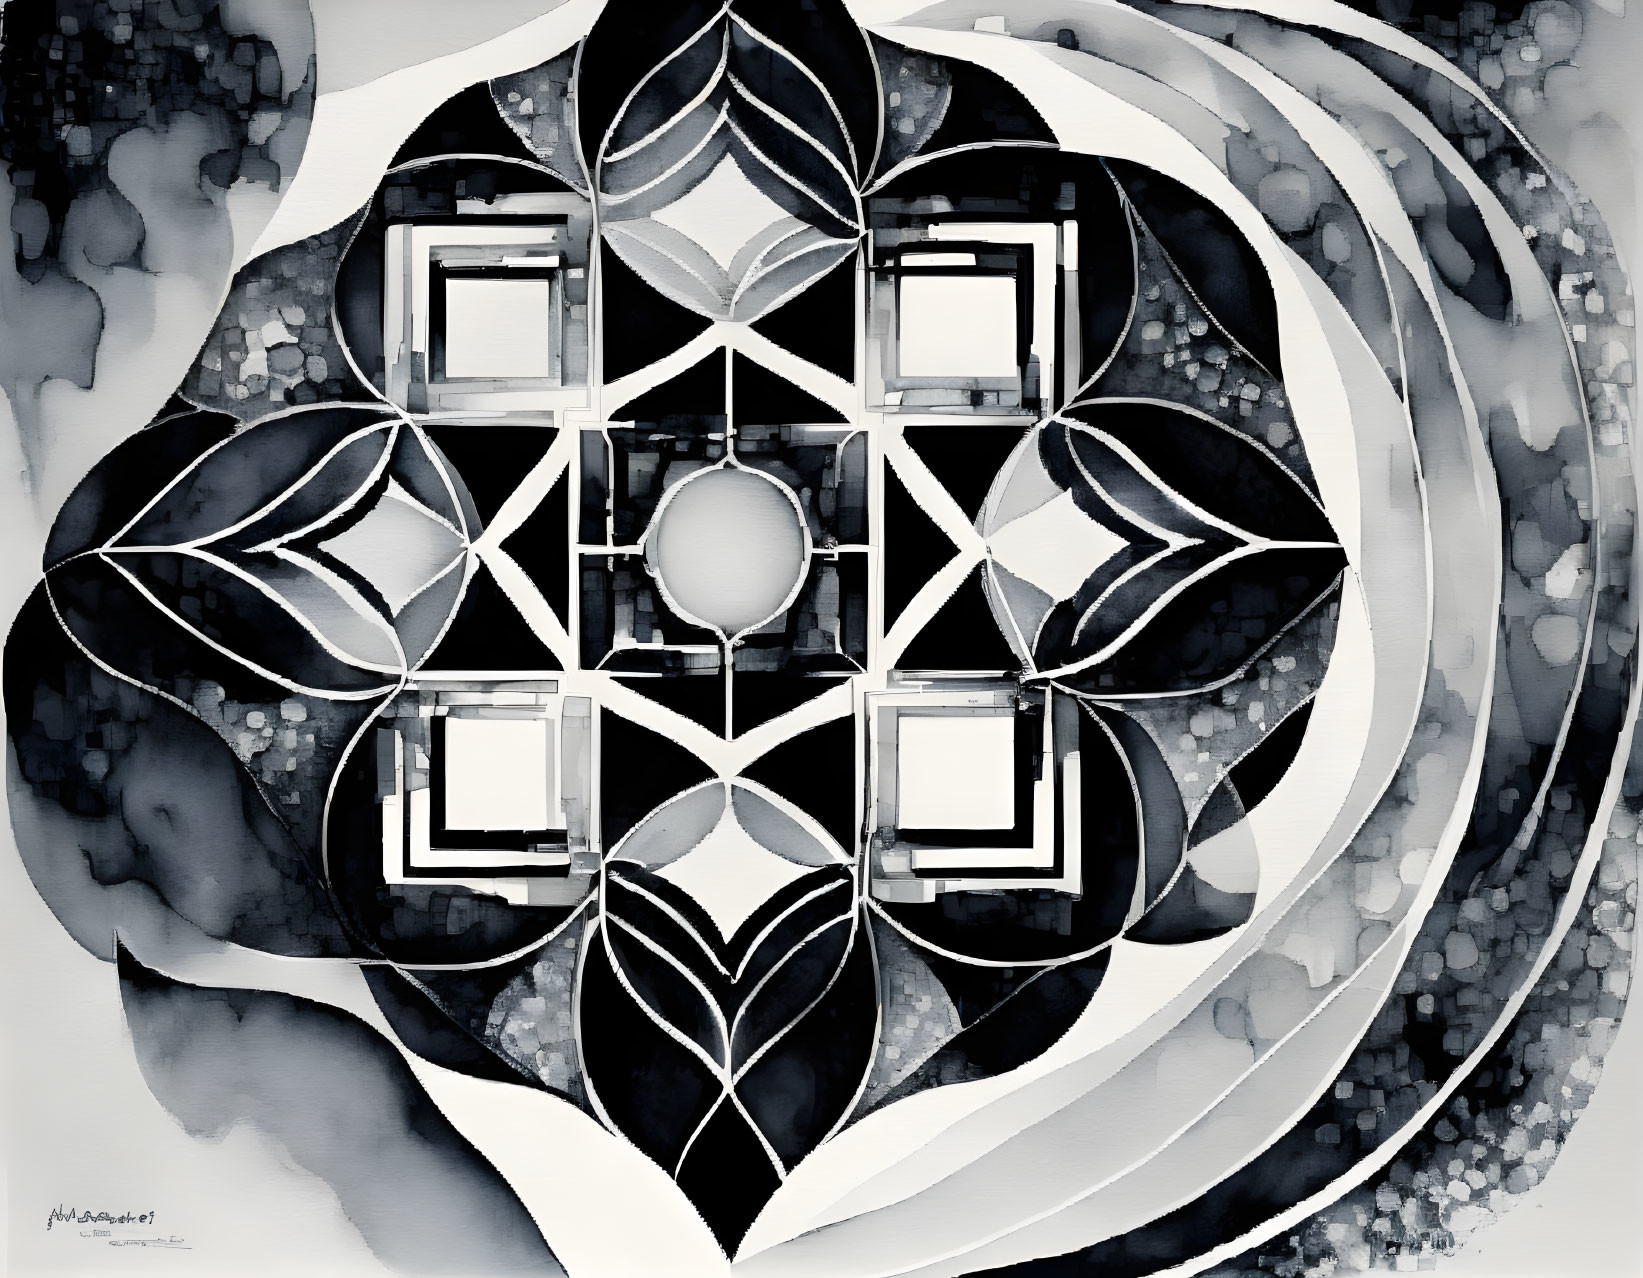 Symmetrical Abstract Grayscale Artwork with Leaf and Circular Patterns